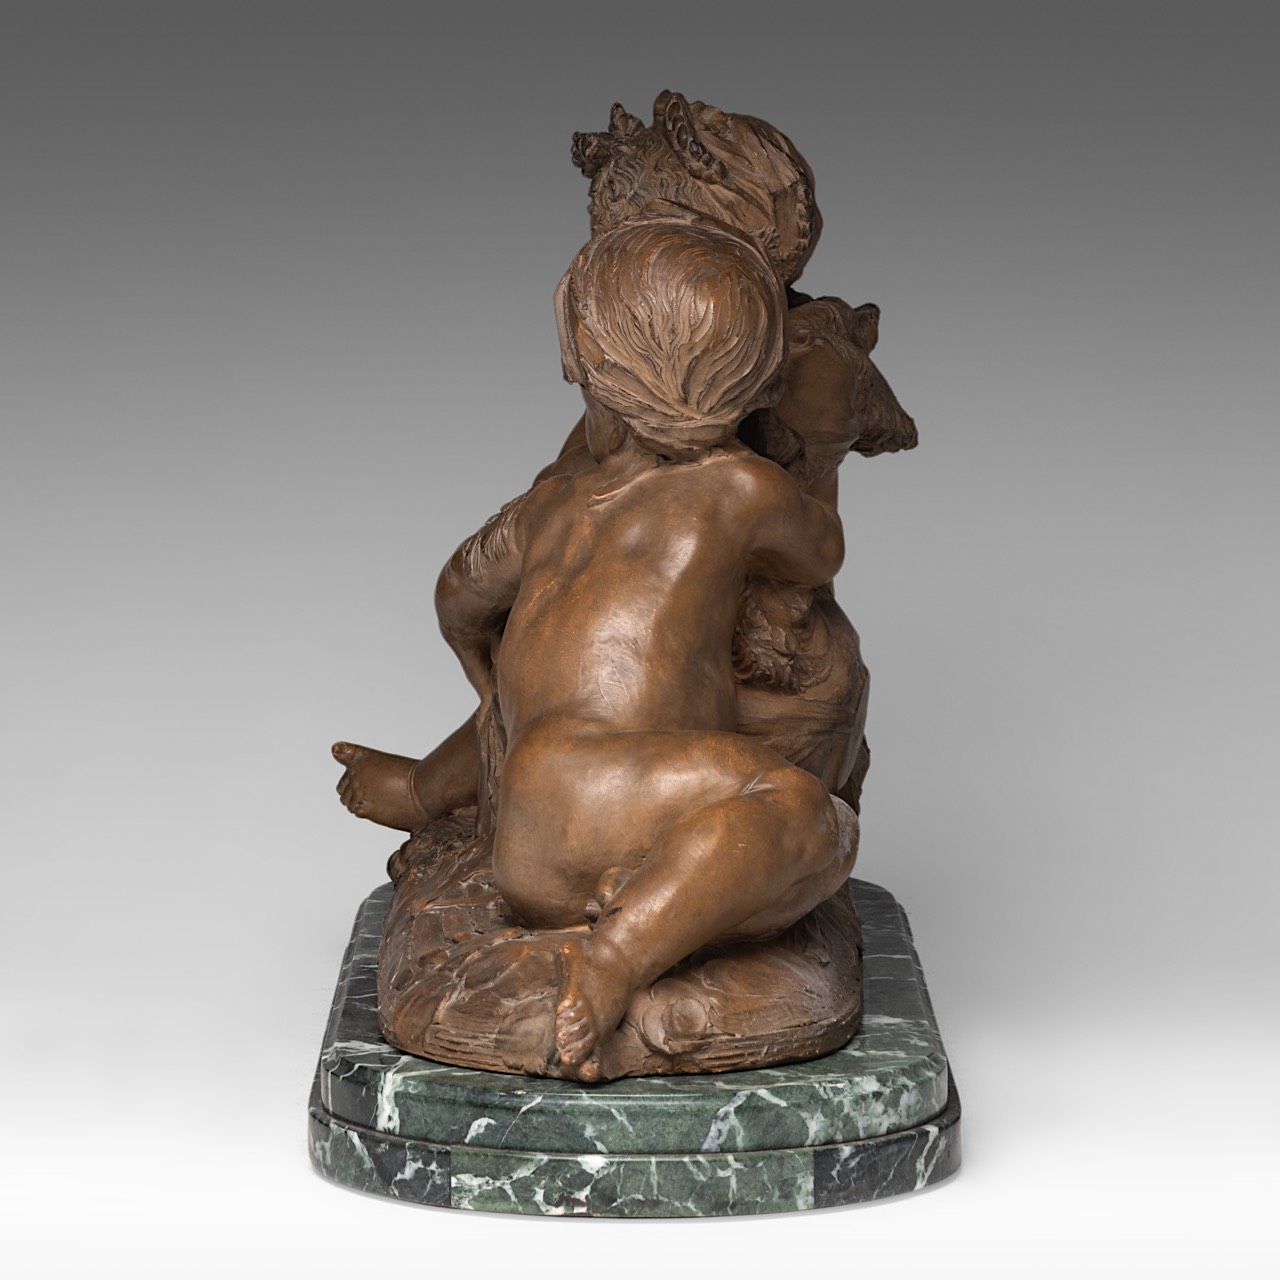 Carrier-Belleuse (1824-1887), two putti by the fountain, terracotta on a marble base, H 43 - W 68 cm - Bild 3 aus 10